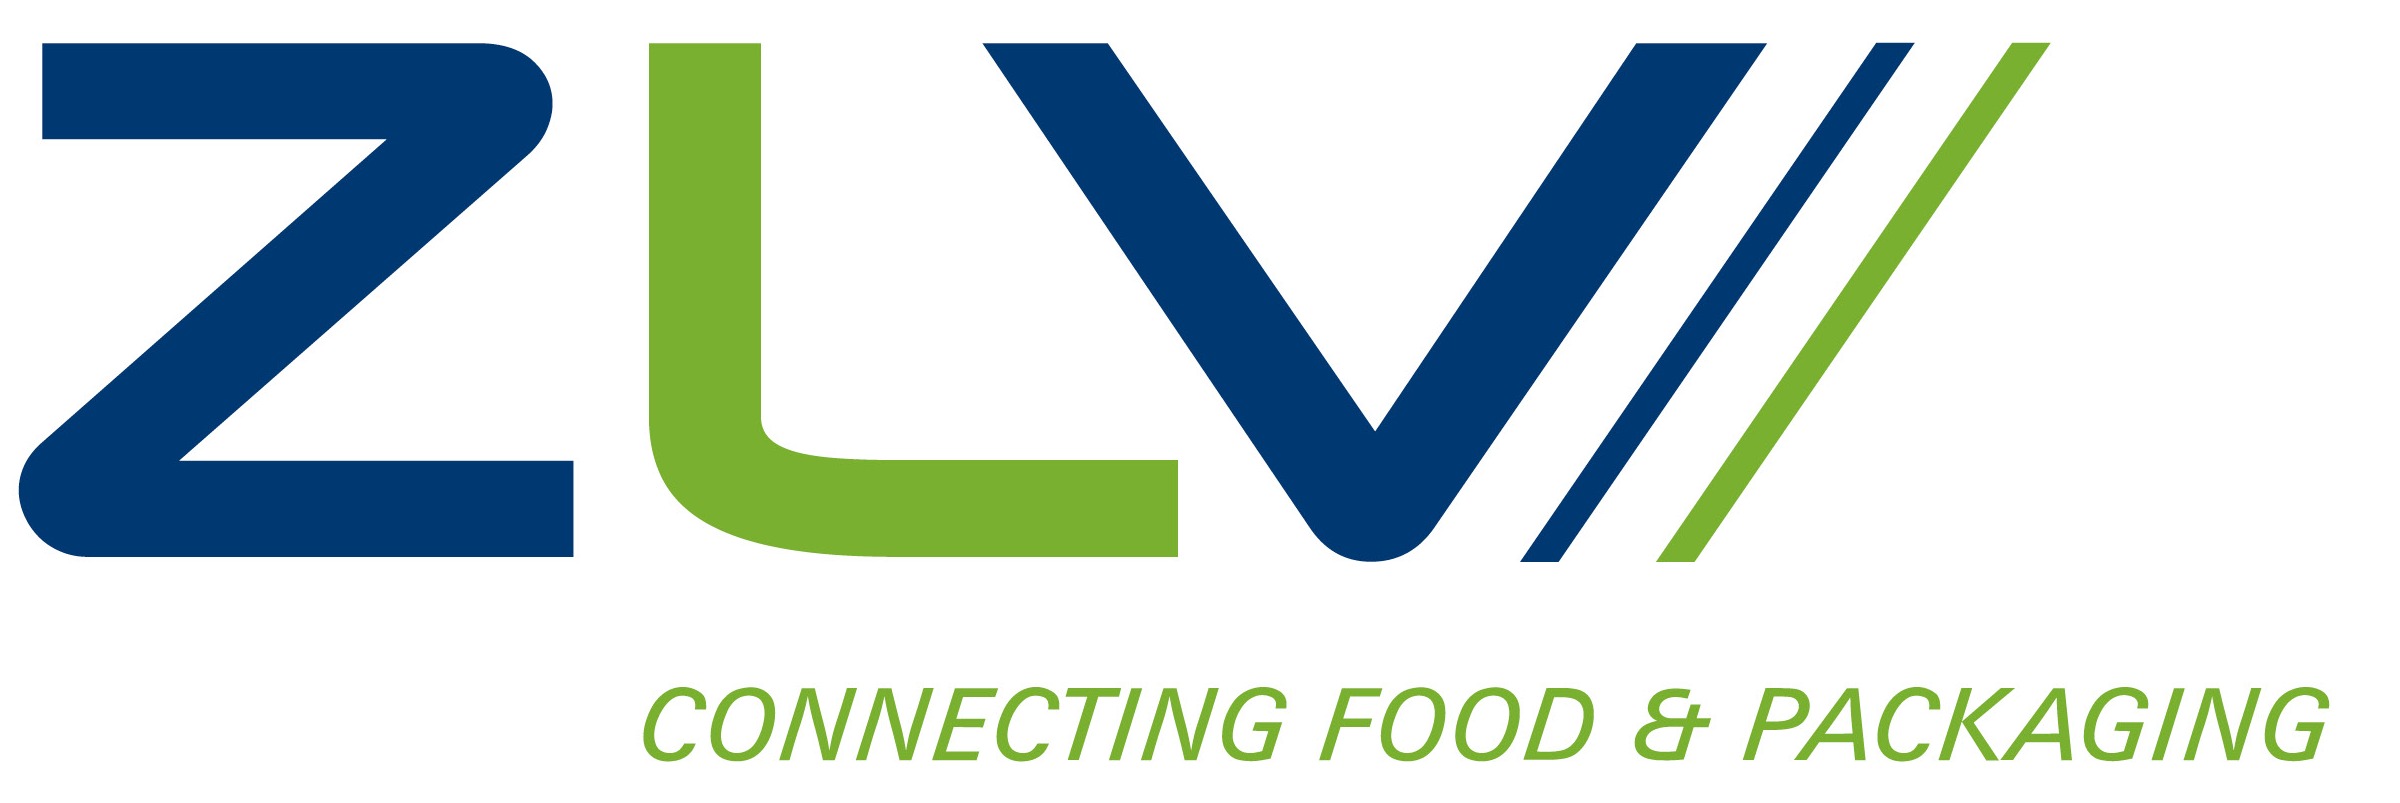 ZLV - Connecting Food & Packaging, Logo